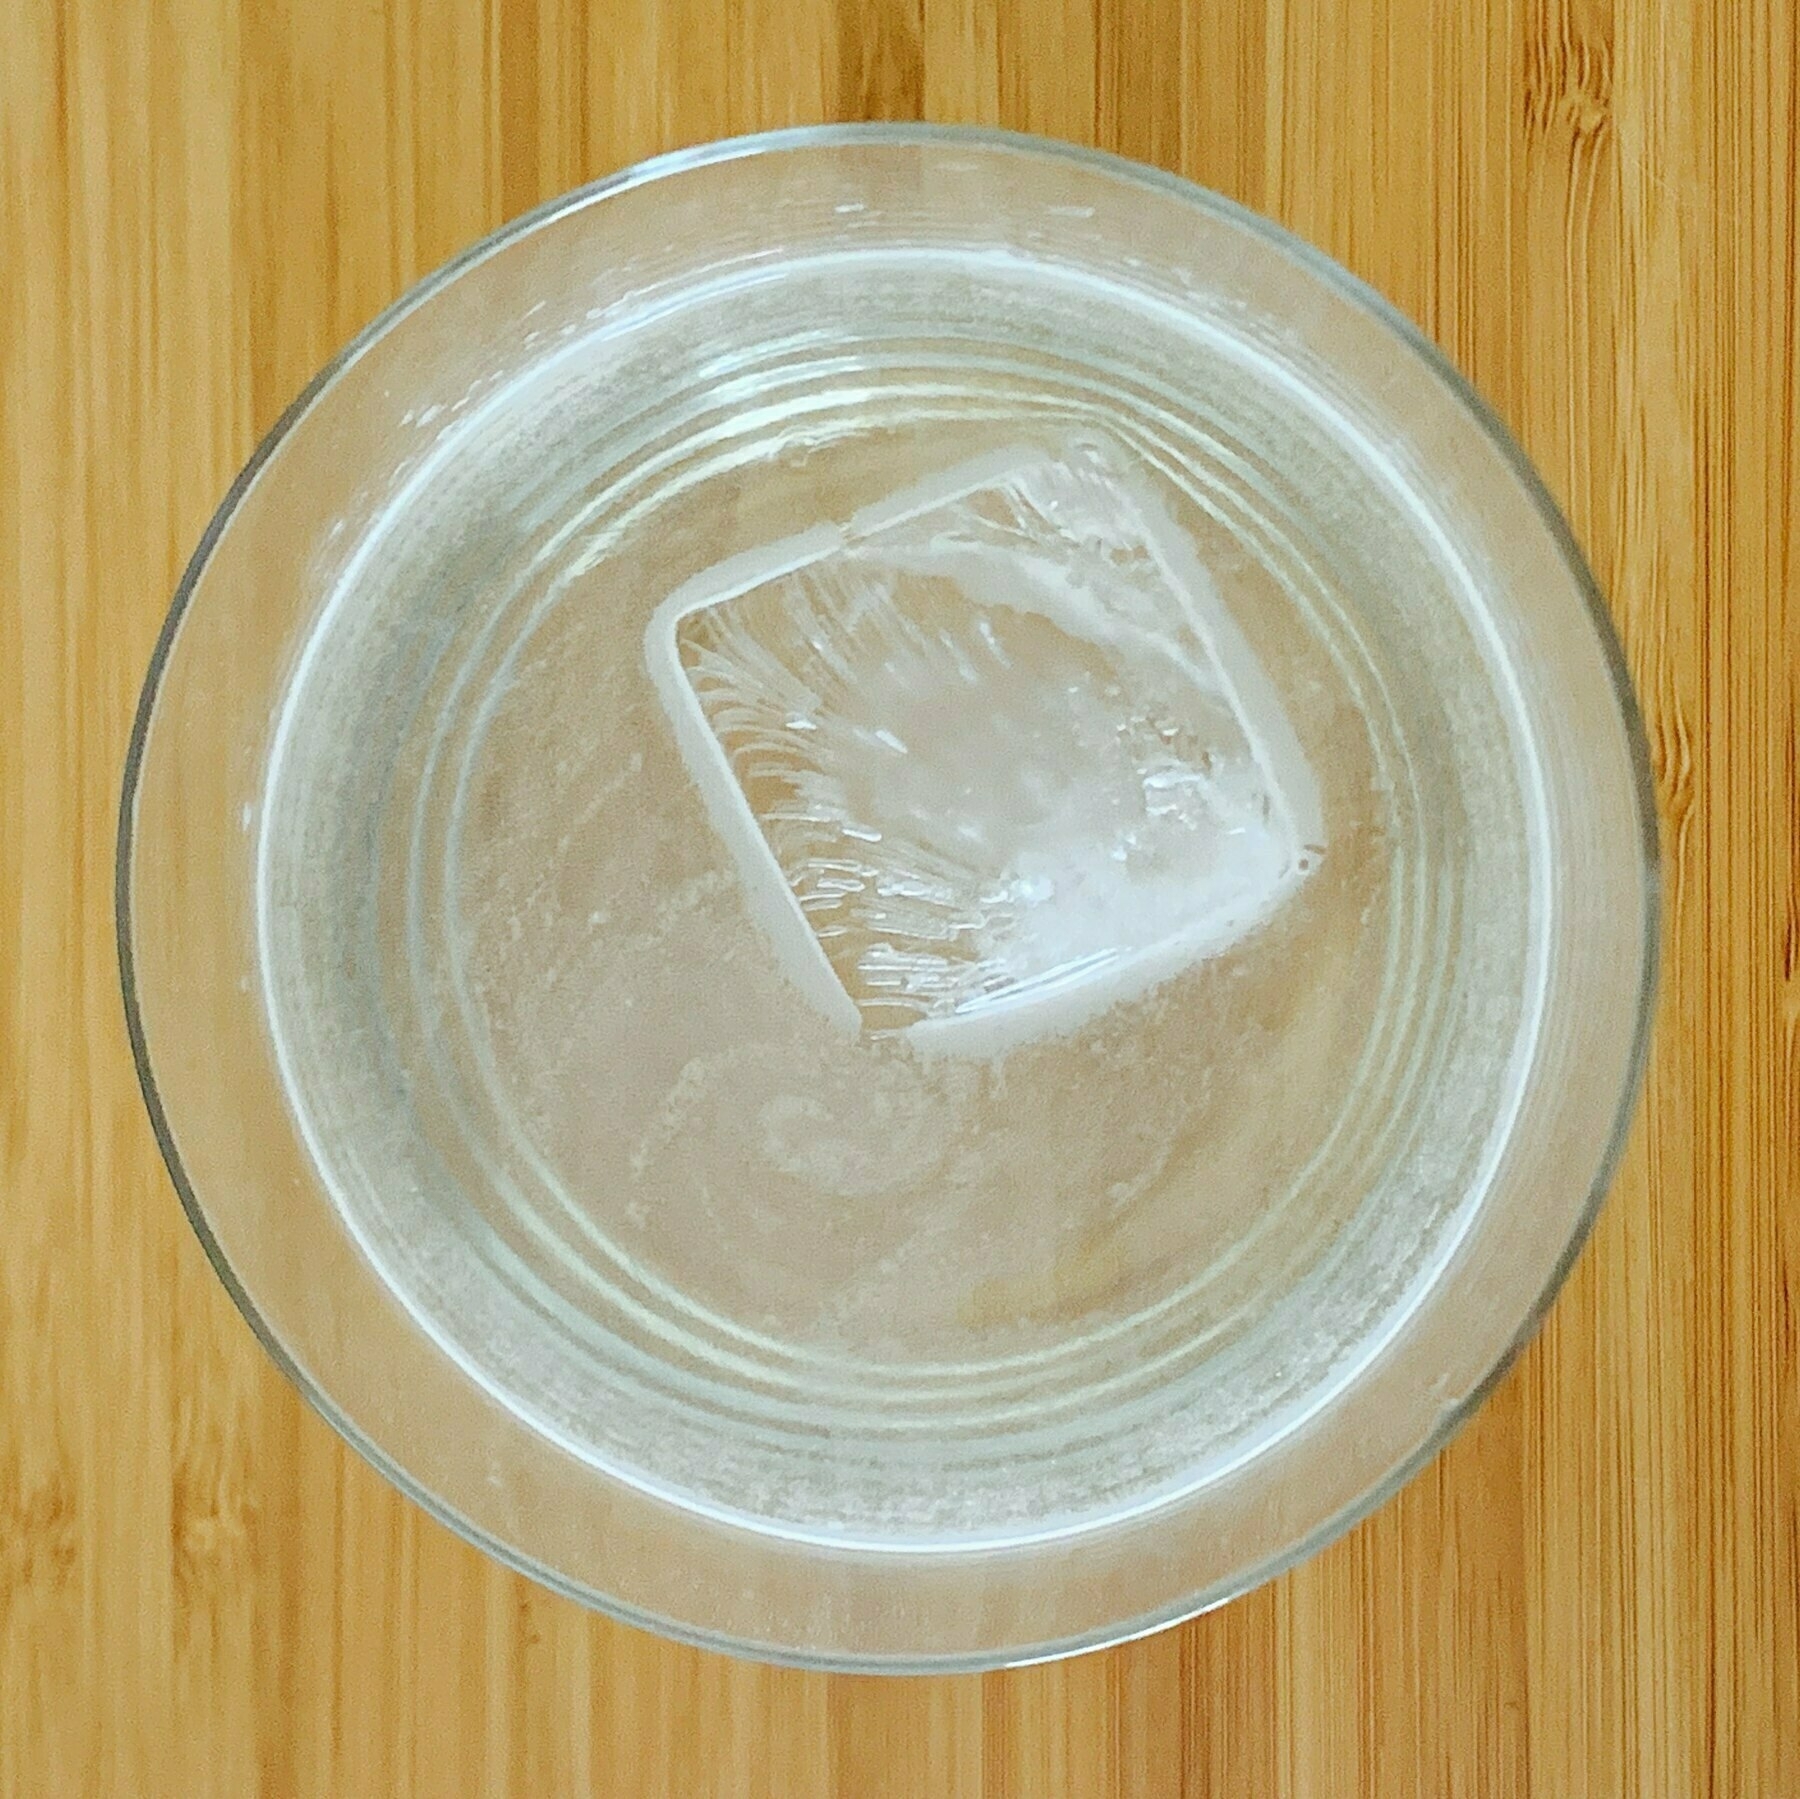 Top down look at a glass of water with an ice cube